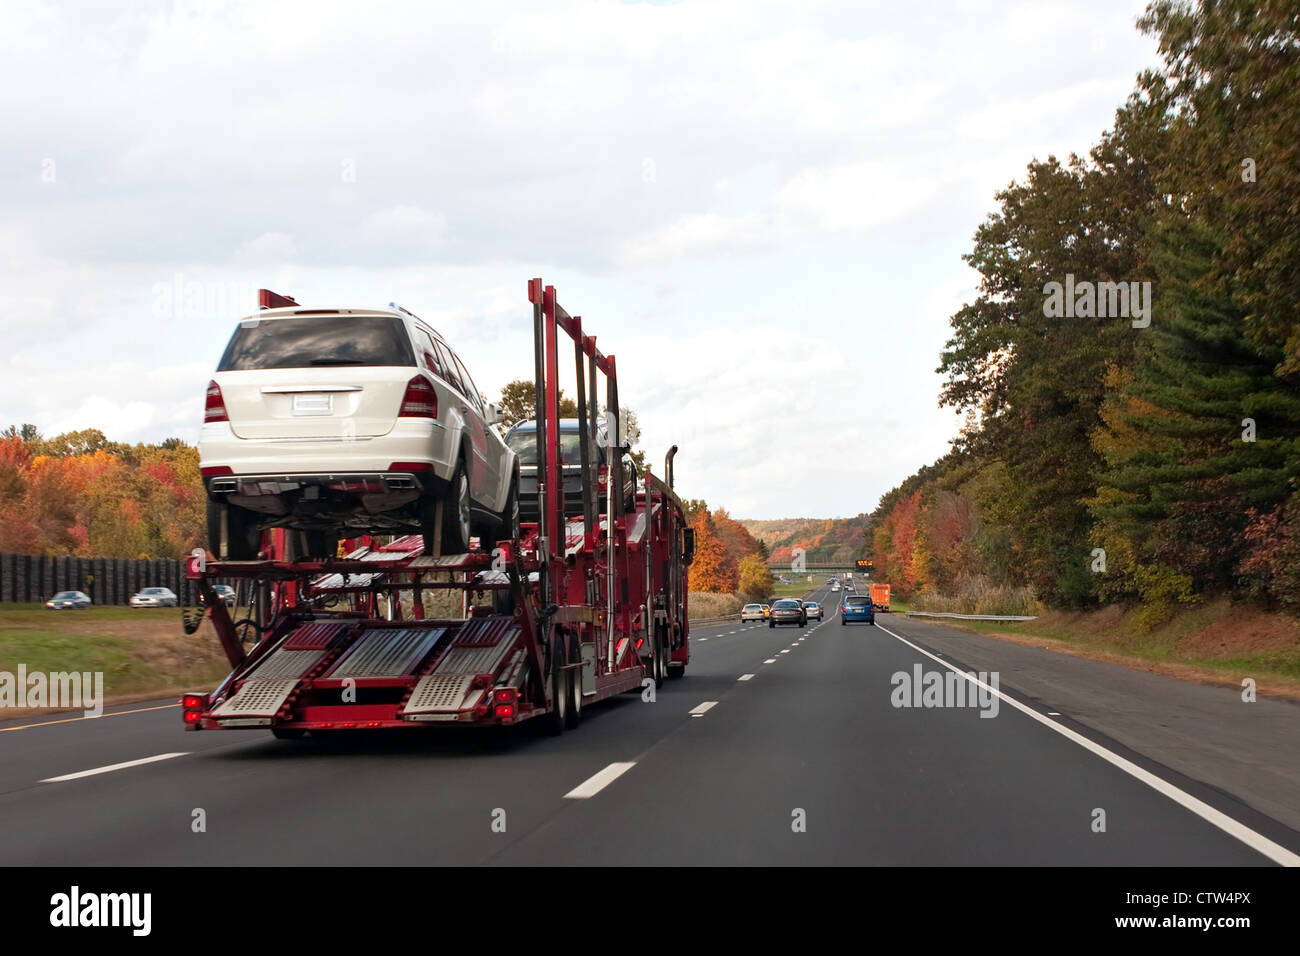 An automotive car carrier truck driving down the highway with a full load of new vehicles. Stock Photo